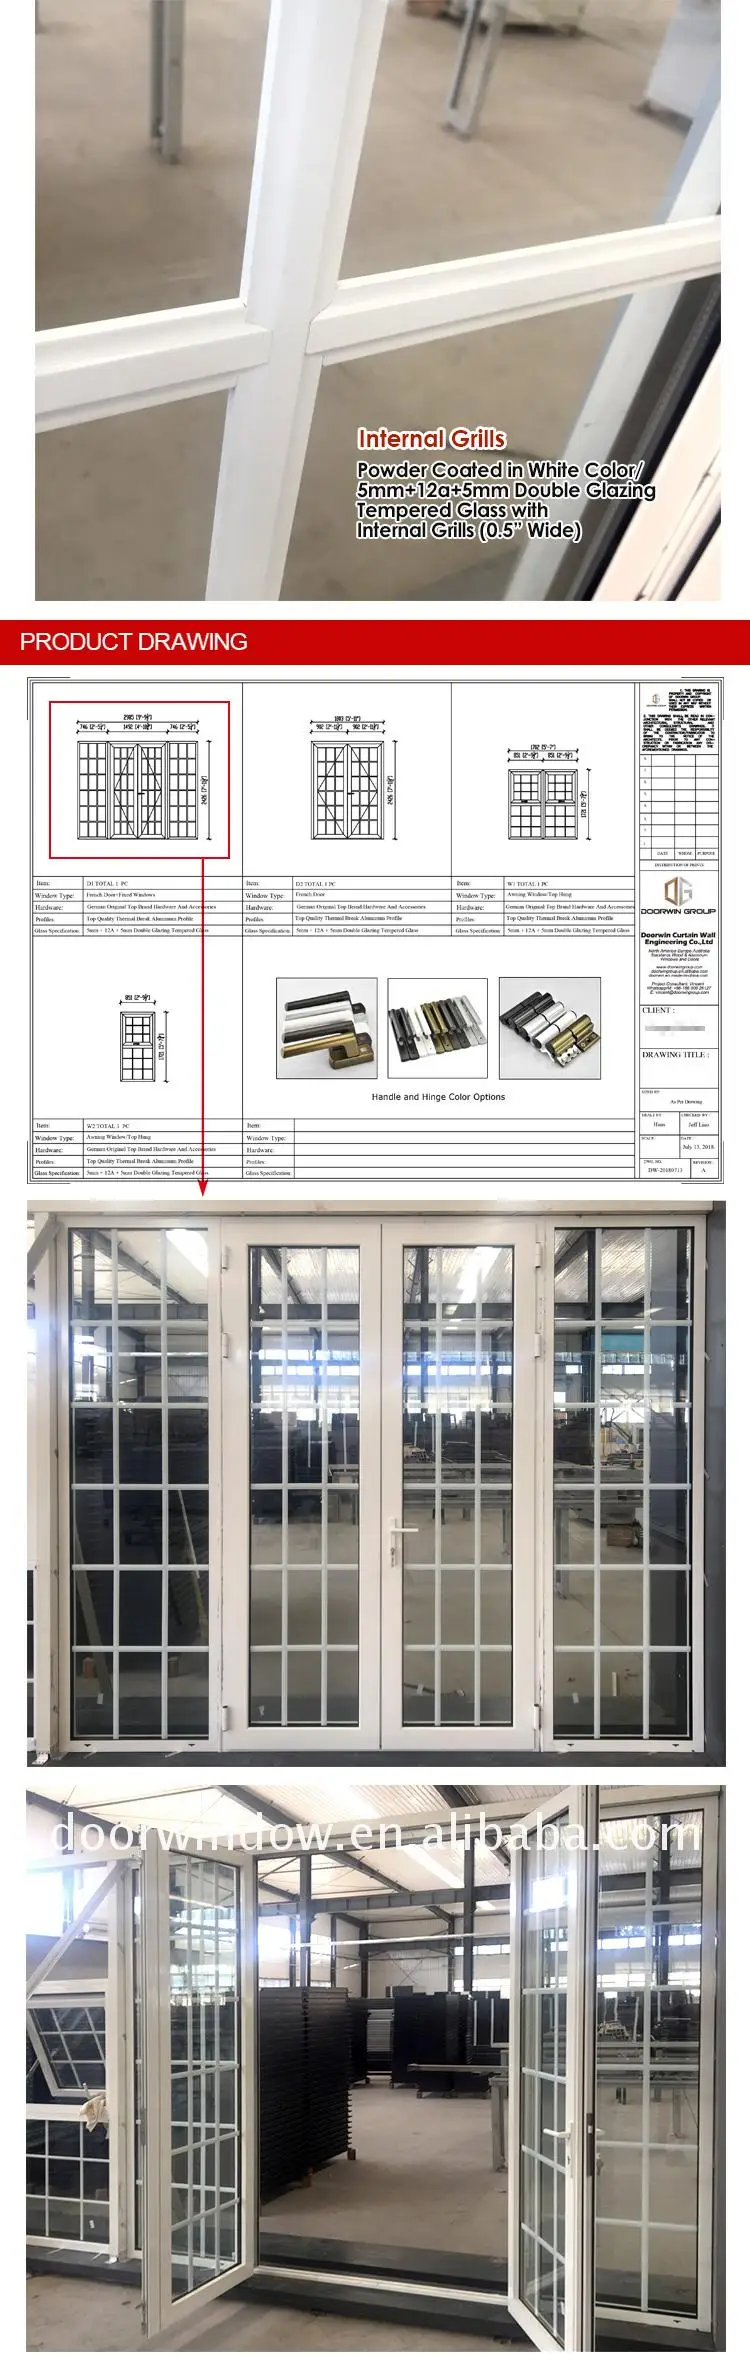 Factory style window office door with glass house design